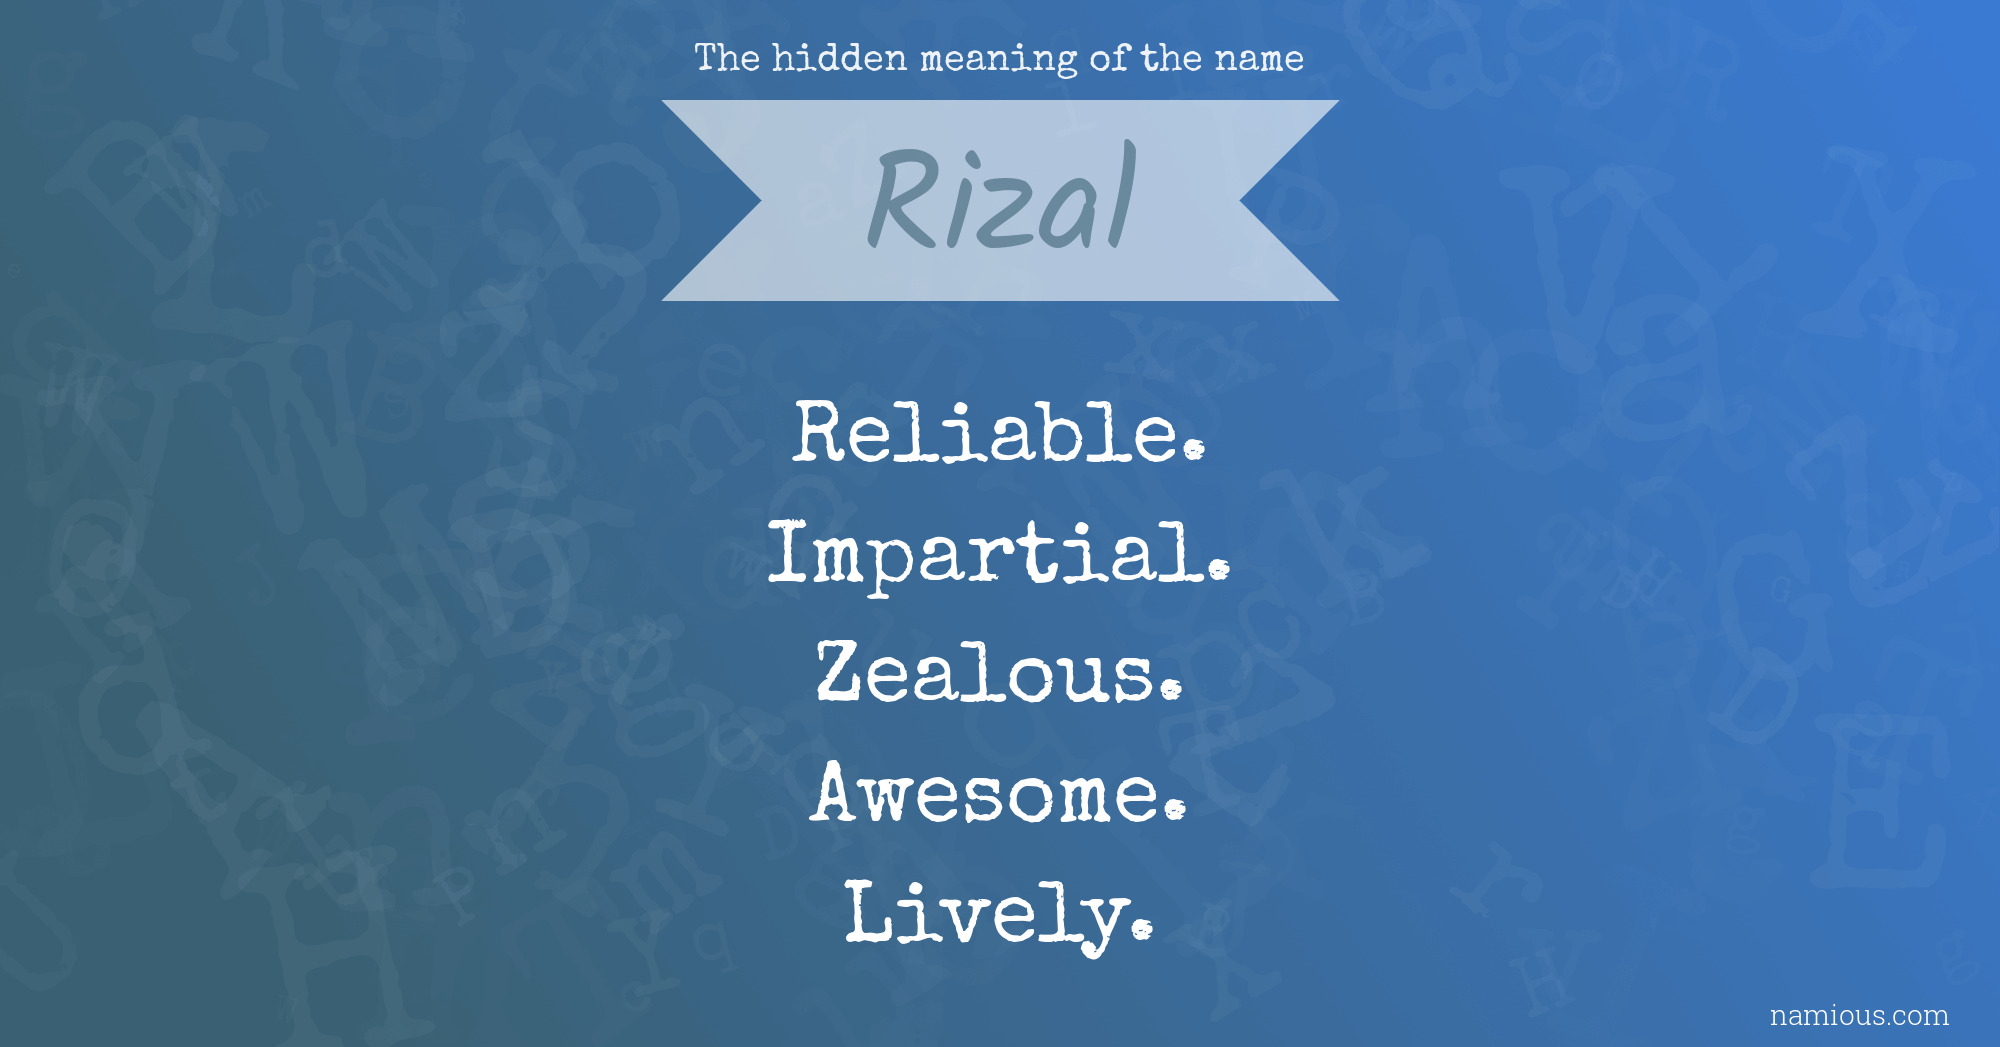 The hidden meaning of the name Rizal